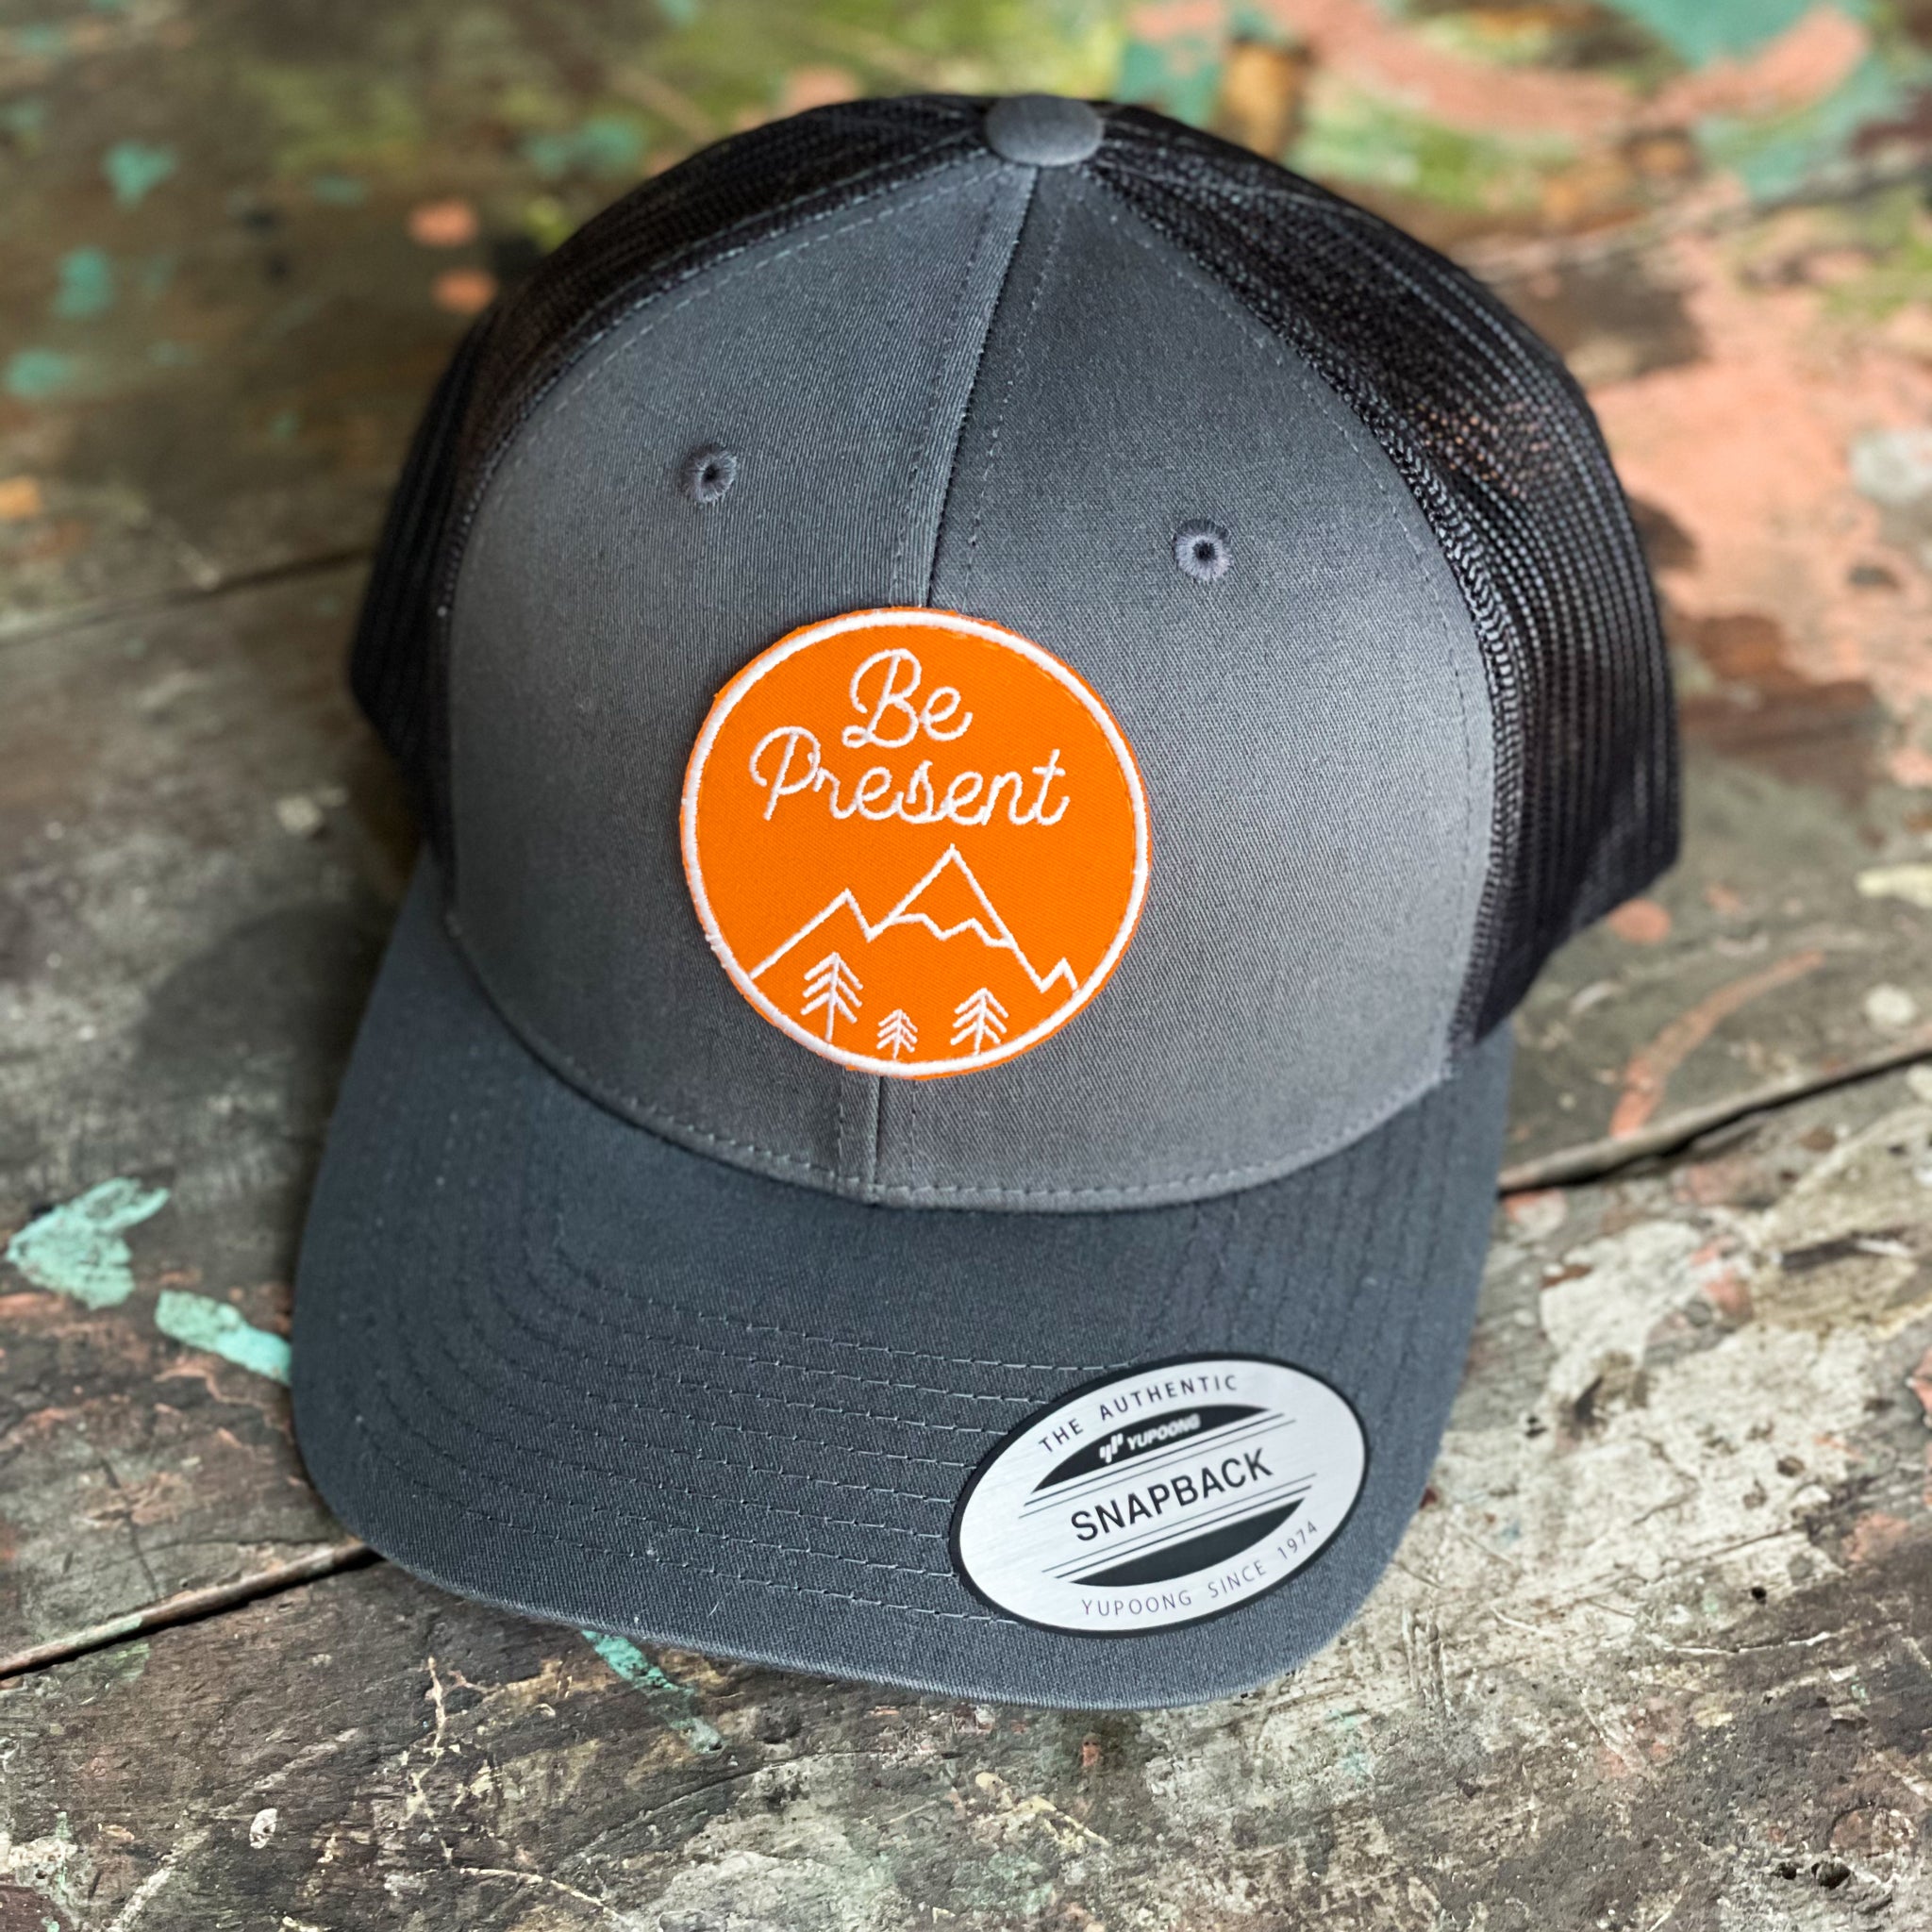 Be present trucker style hat for mindfulness meditation